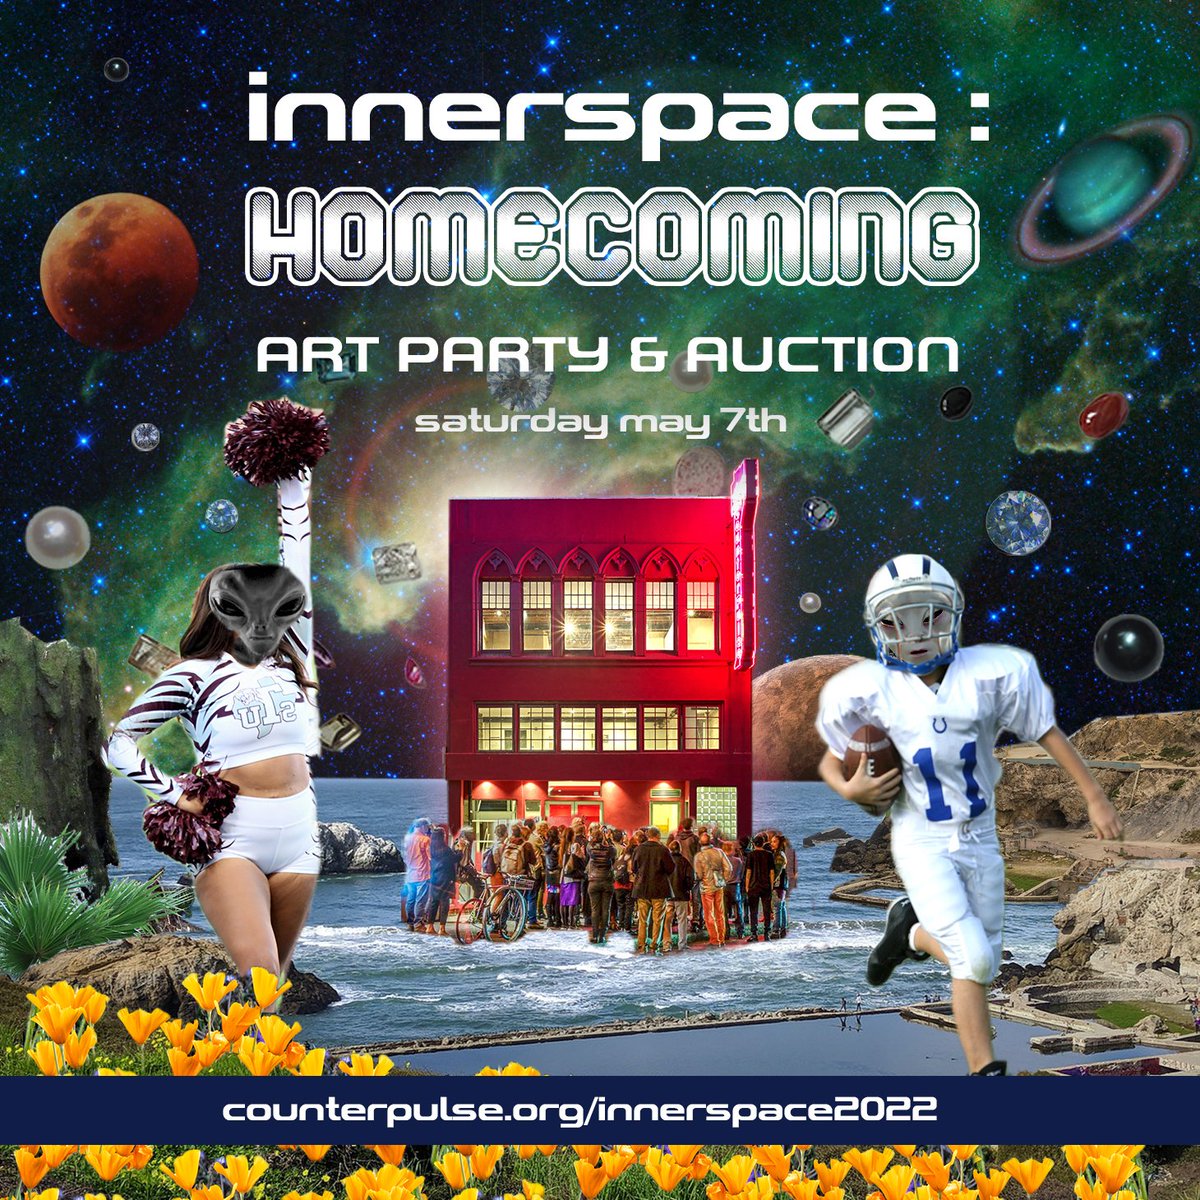 A flyer montage a football player, a cheerleader with an alien face, a picture of a crowd outside the CounterPulse building, set against a colorful space landscape backdrop